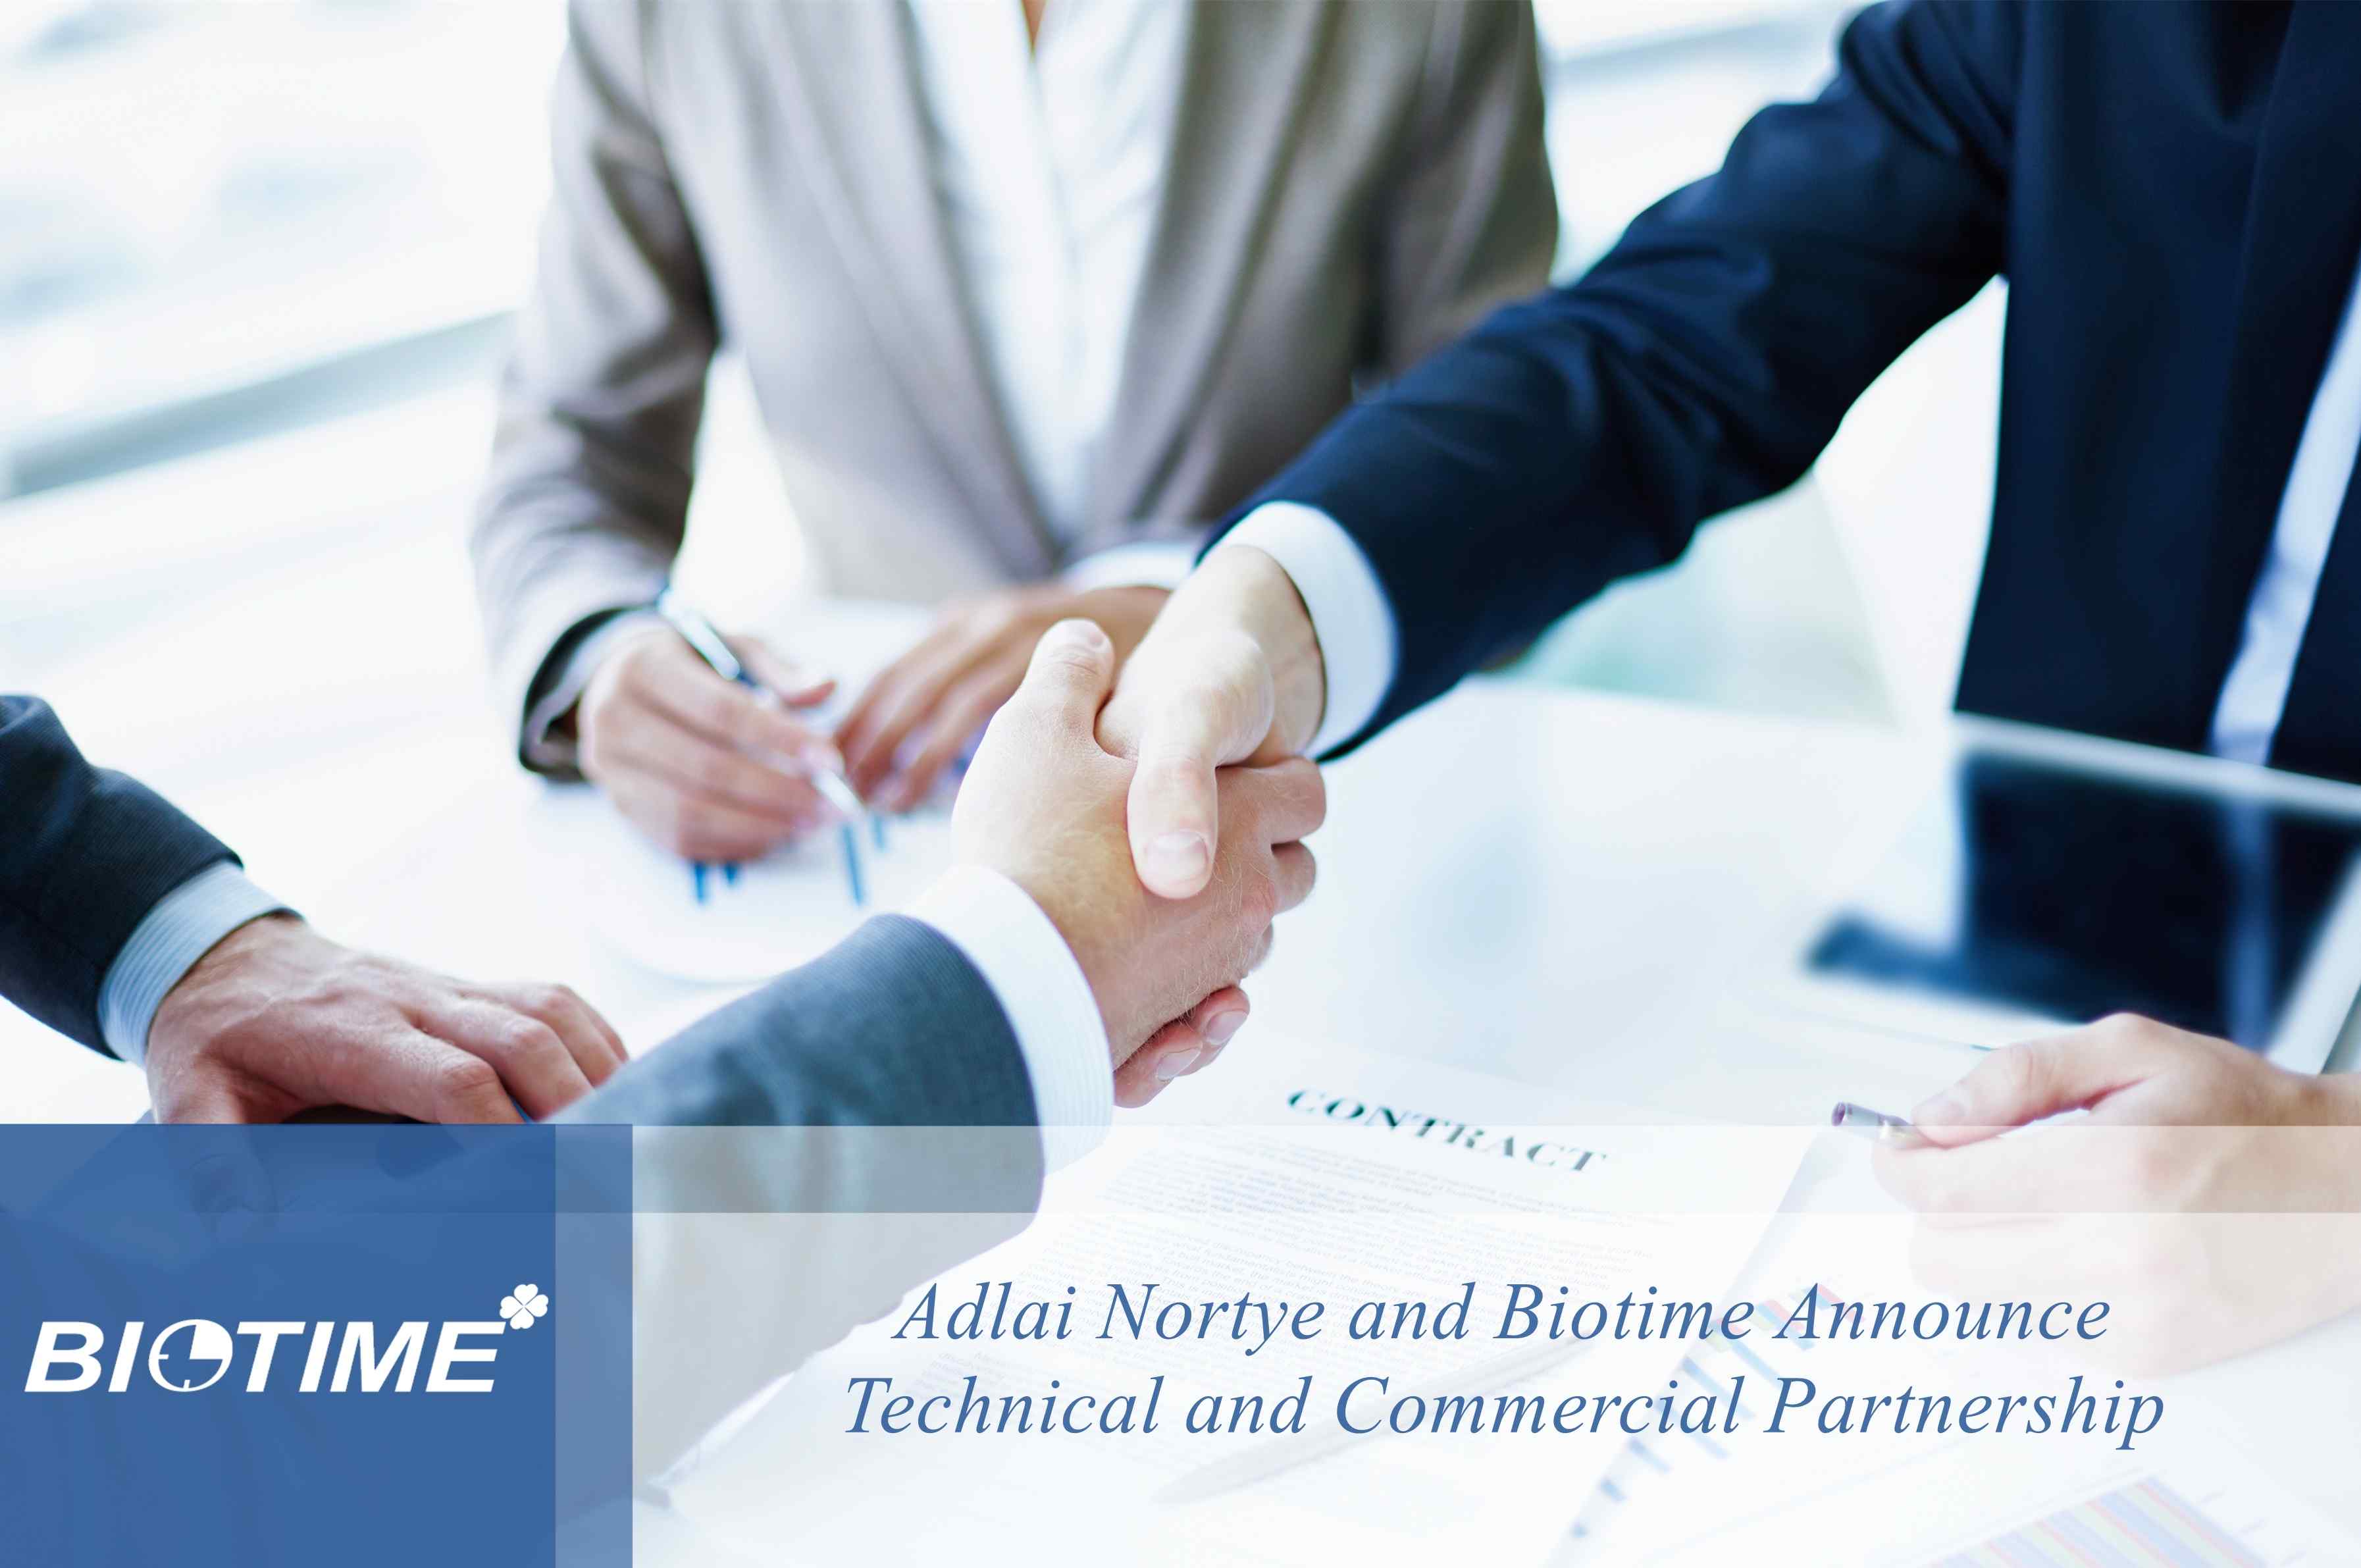 Adlai Nortye and Biotime Announce Technical and Commercial Partnership